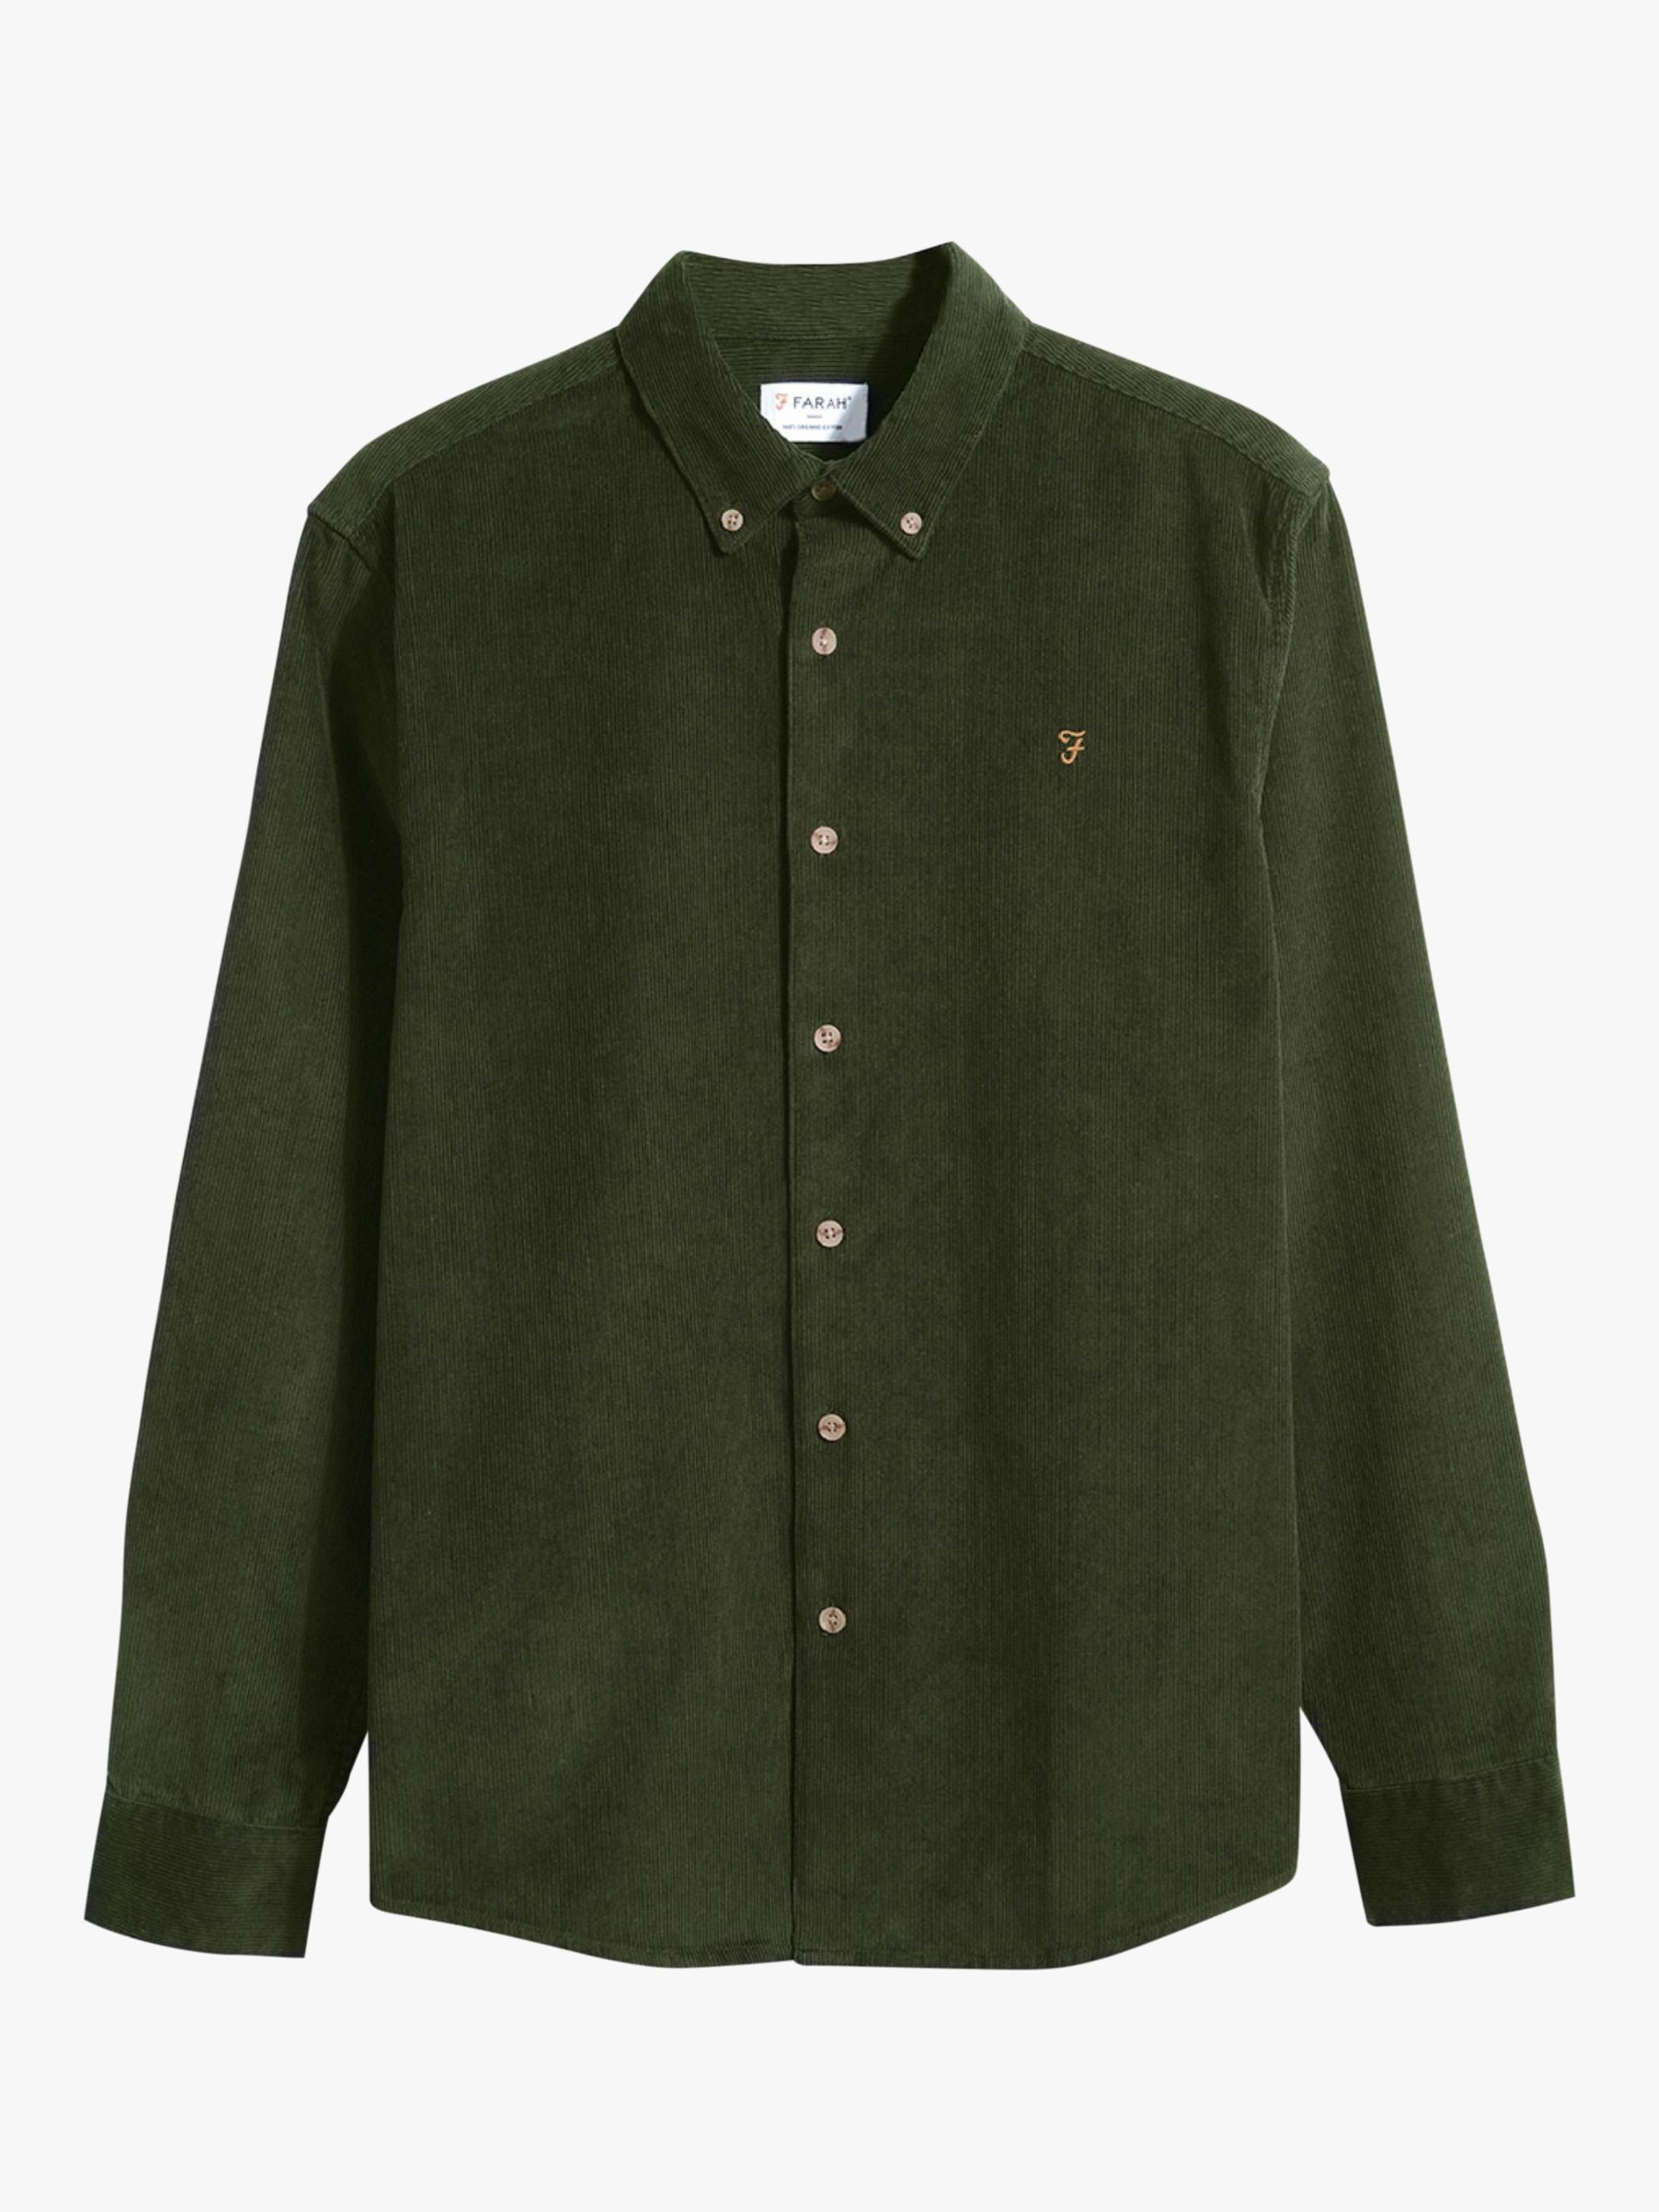 Farah Bowery Casual Fit Organic Cotton Shirt, Archive Olive Green, S